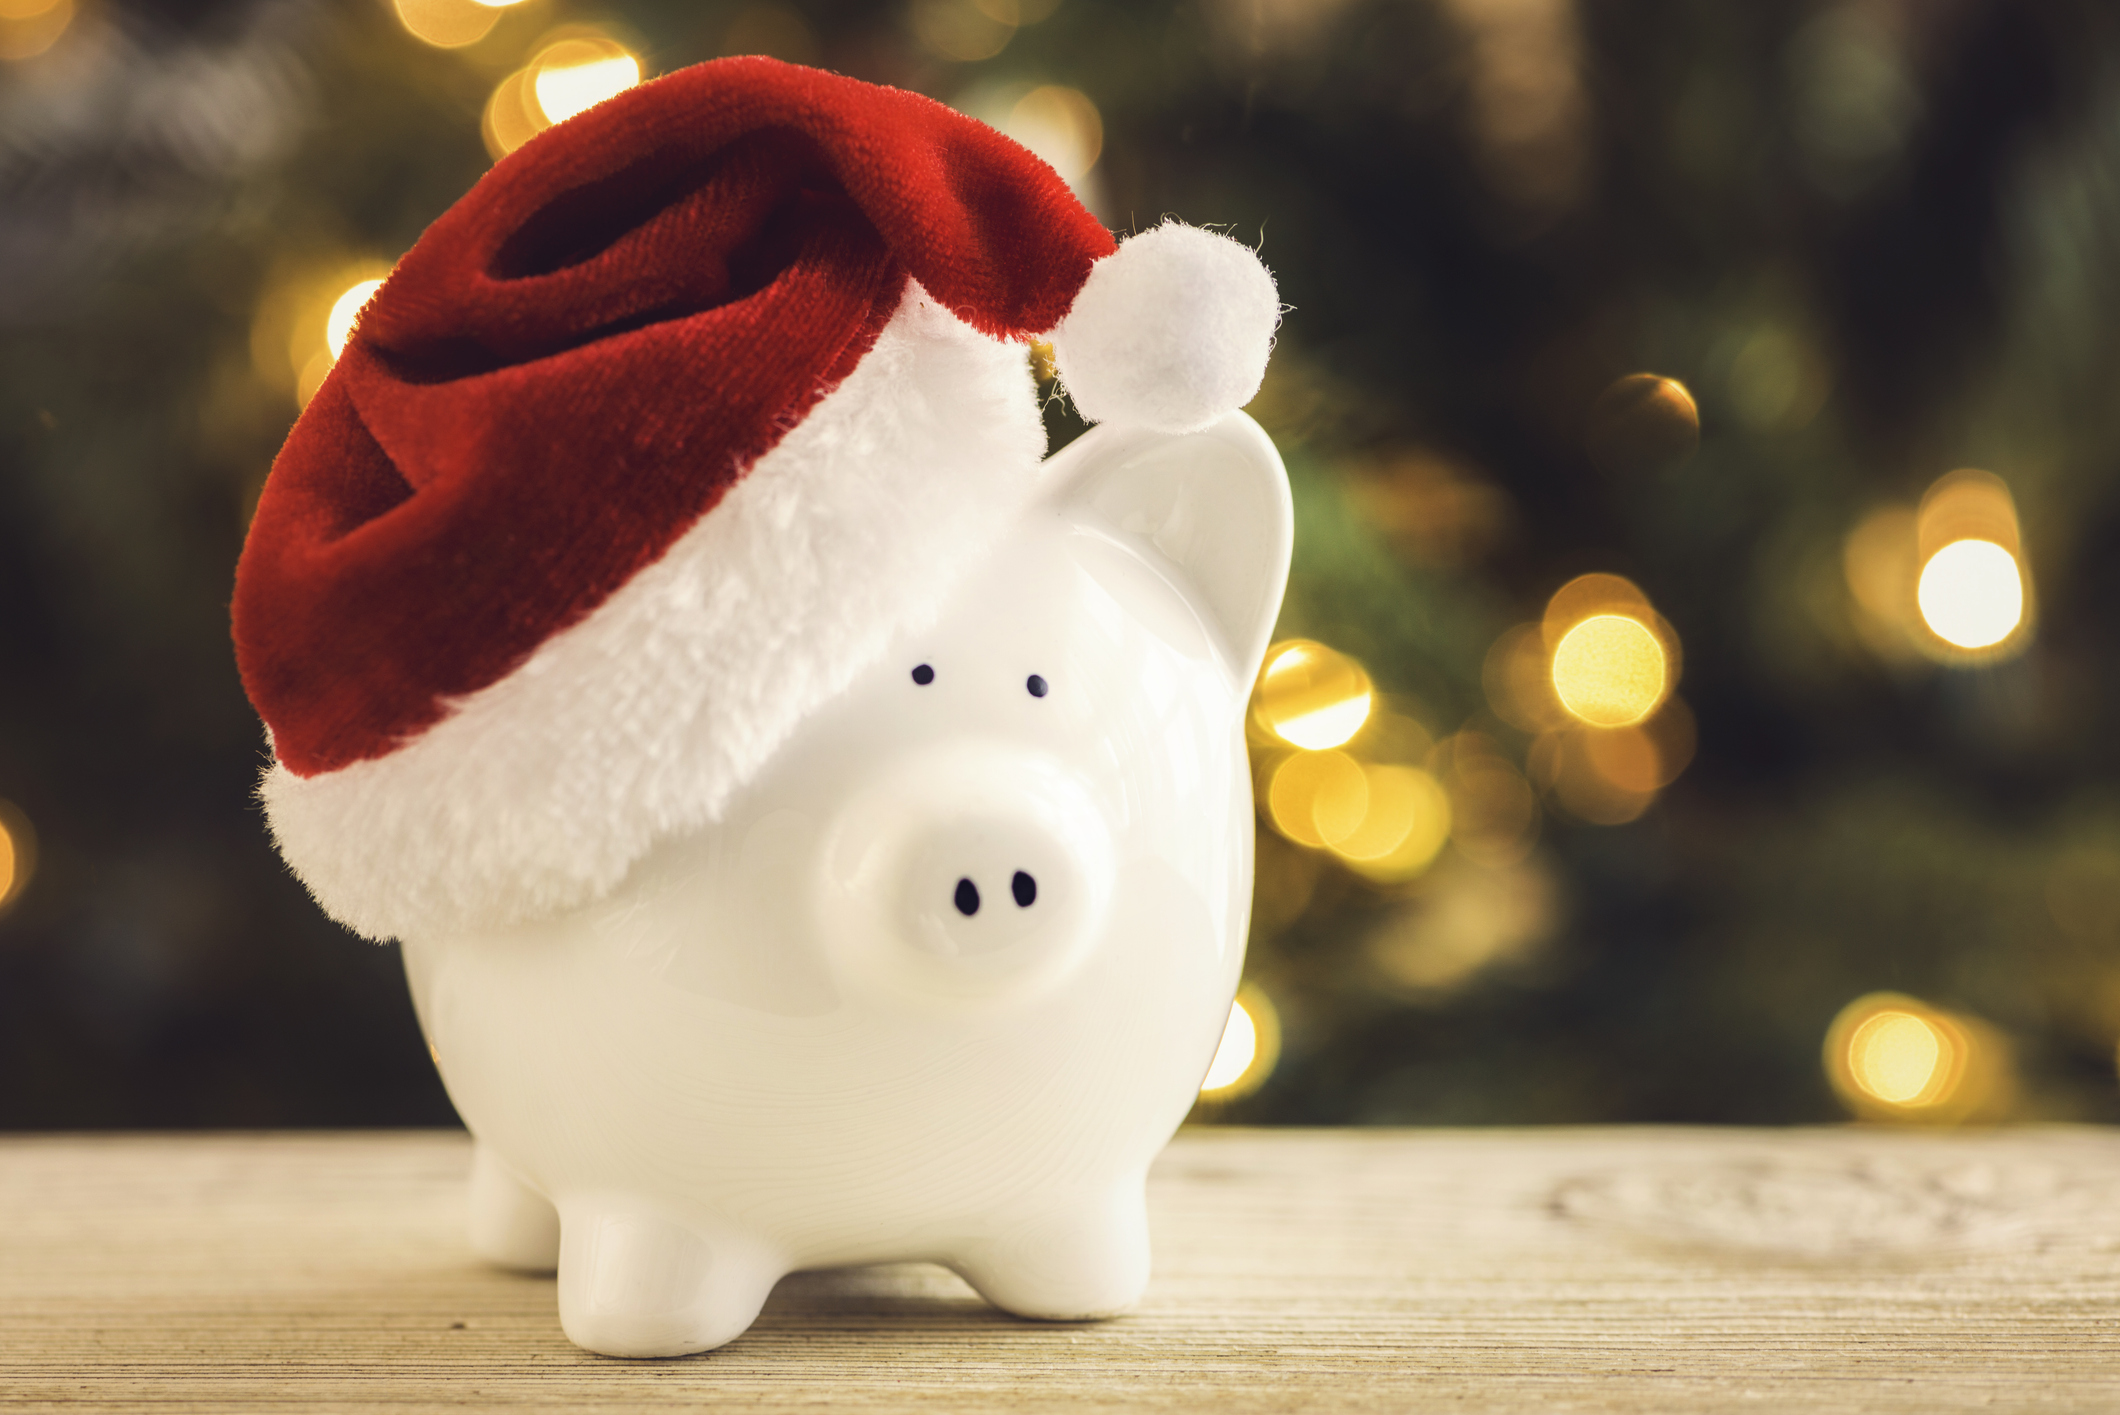 Festive Fun Without Financial Fret: Embracing a Budget-Friendly Holiday Season